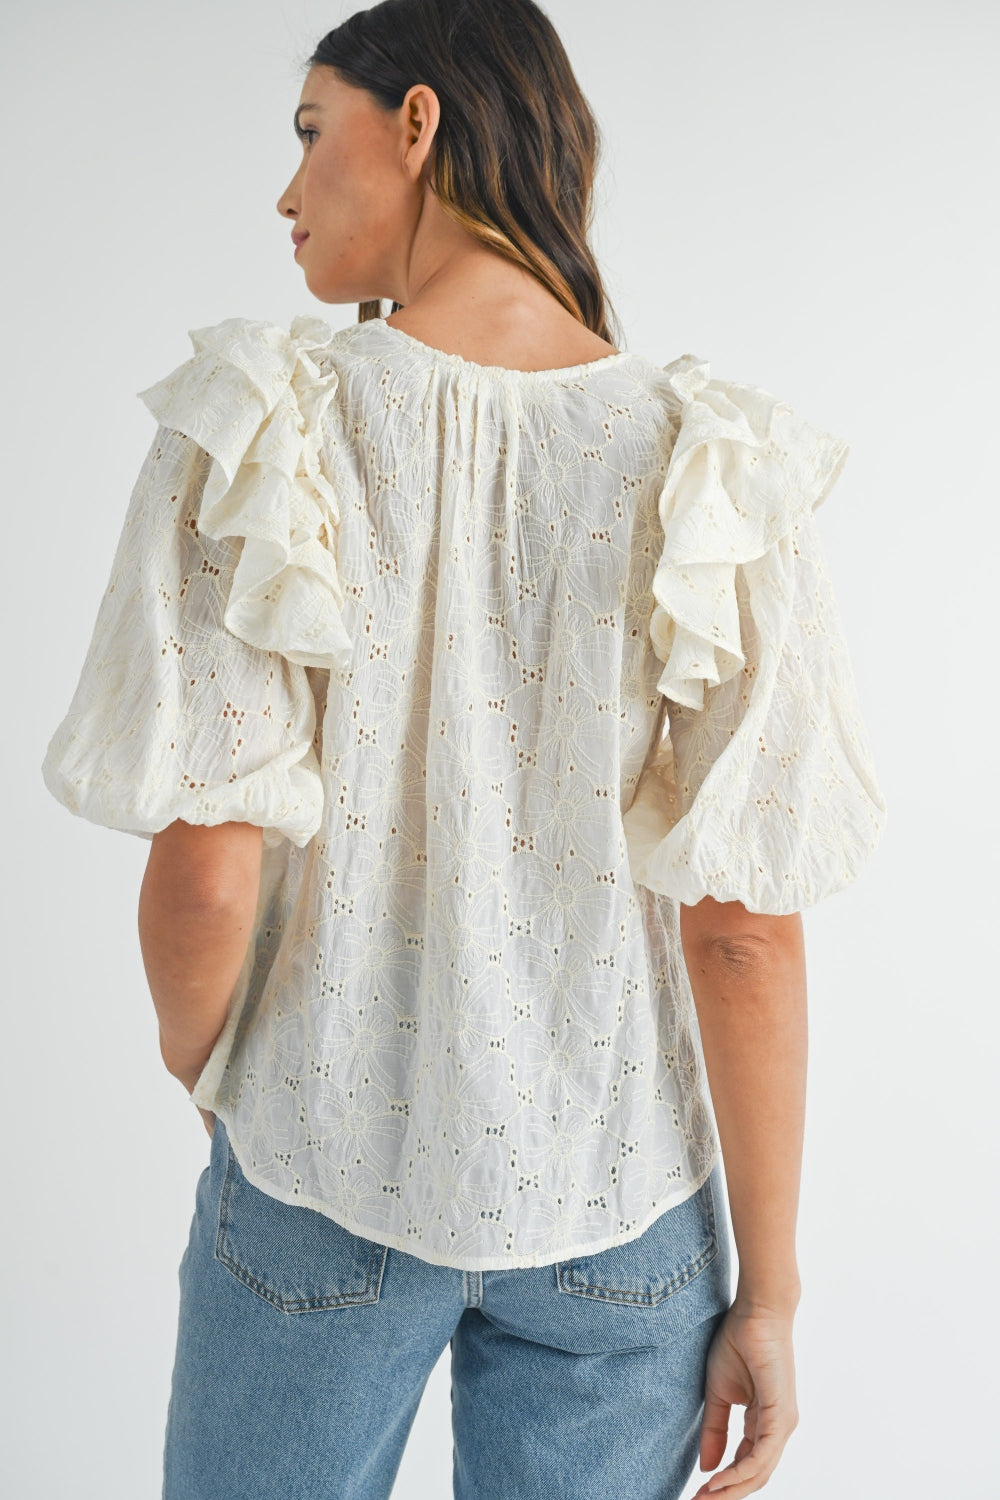 MABLE Eyelet Lace Ruffle Shoulder Puff Sleeve Blouse Trendsi